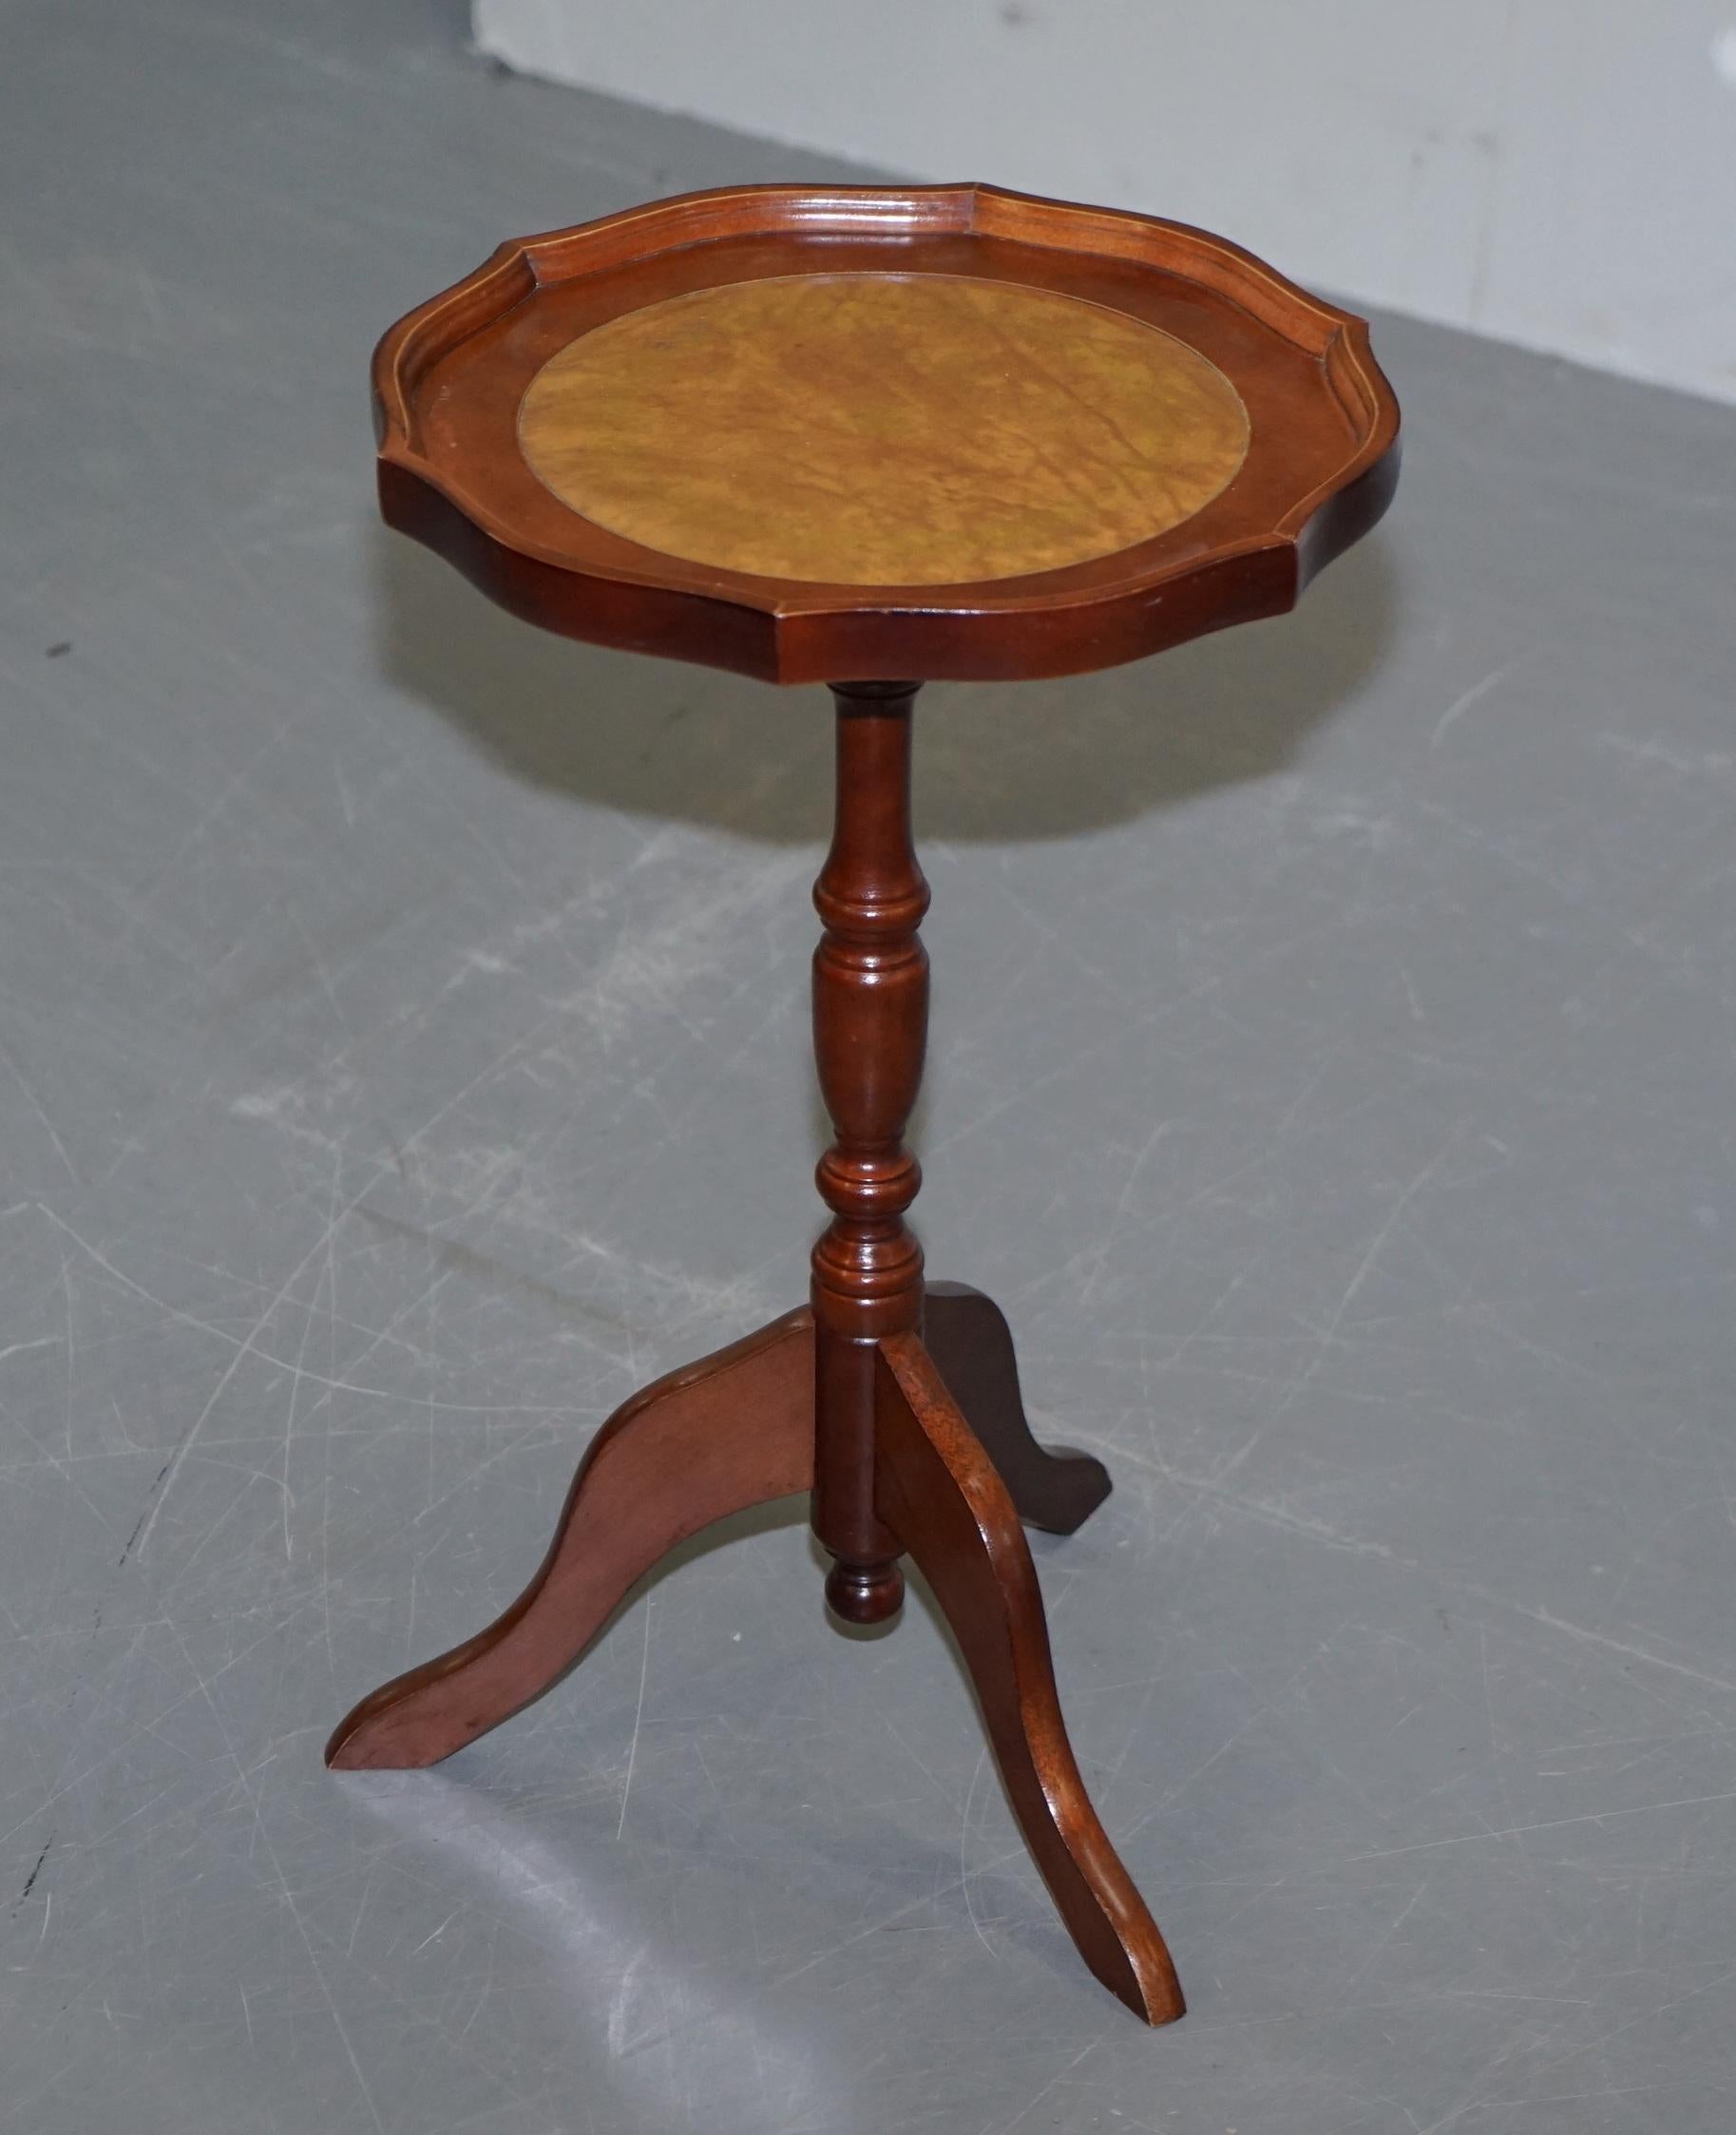 We are delighted to offer for sale this lovely small Bevan Funnell vintage light mahogany with brown leather top lamp or side table.

A good looking well made tripod table in good, we have cleaned waxed and polished it from top to bottom, there